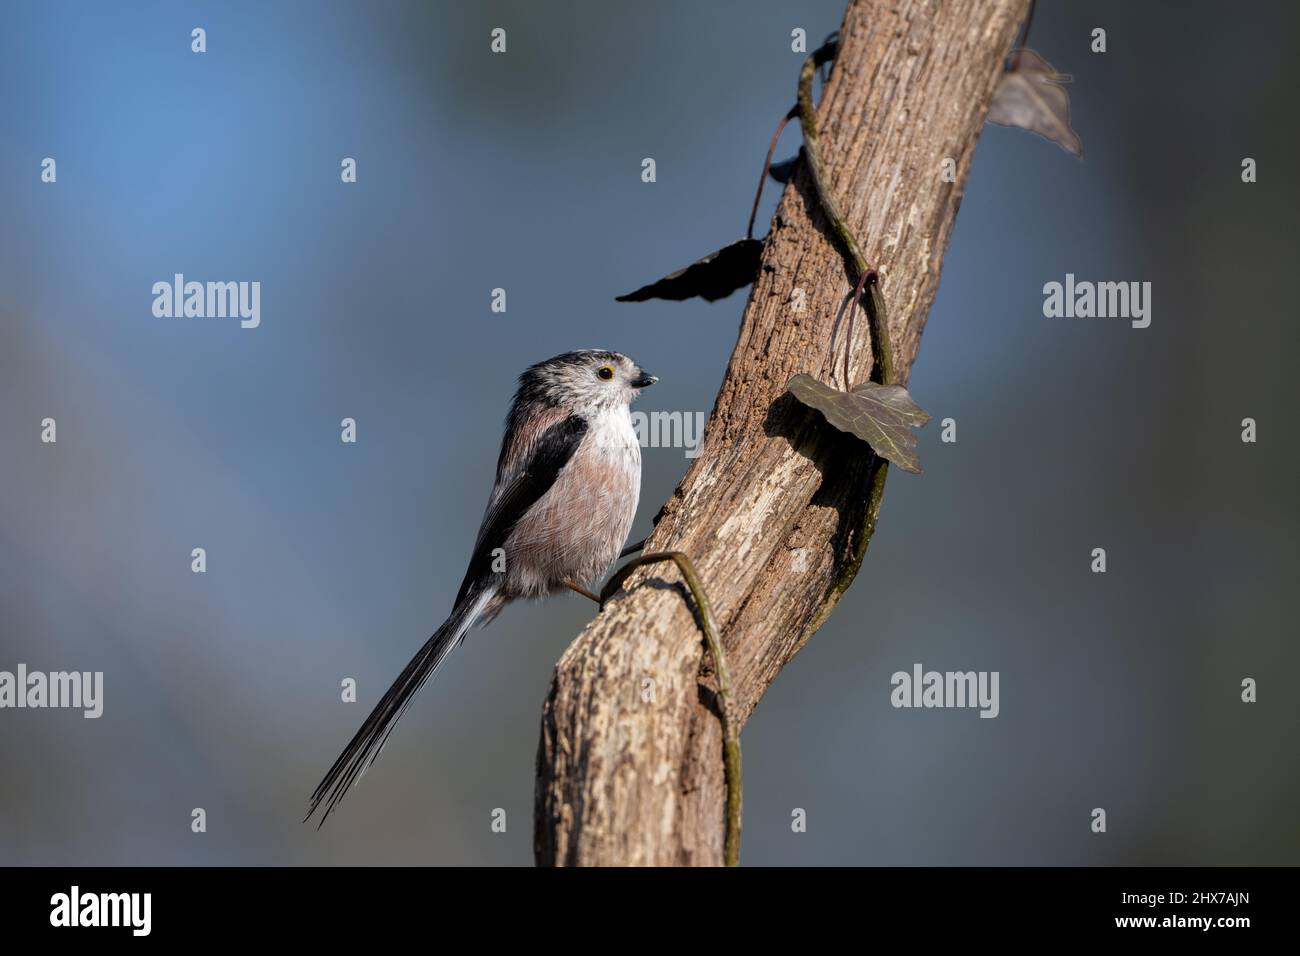 A long-tailed tit sits on the bough of a tree Stock Photo